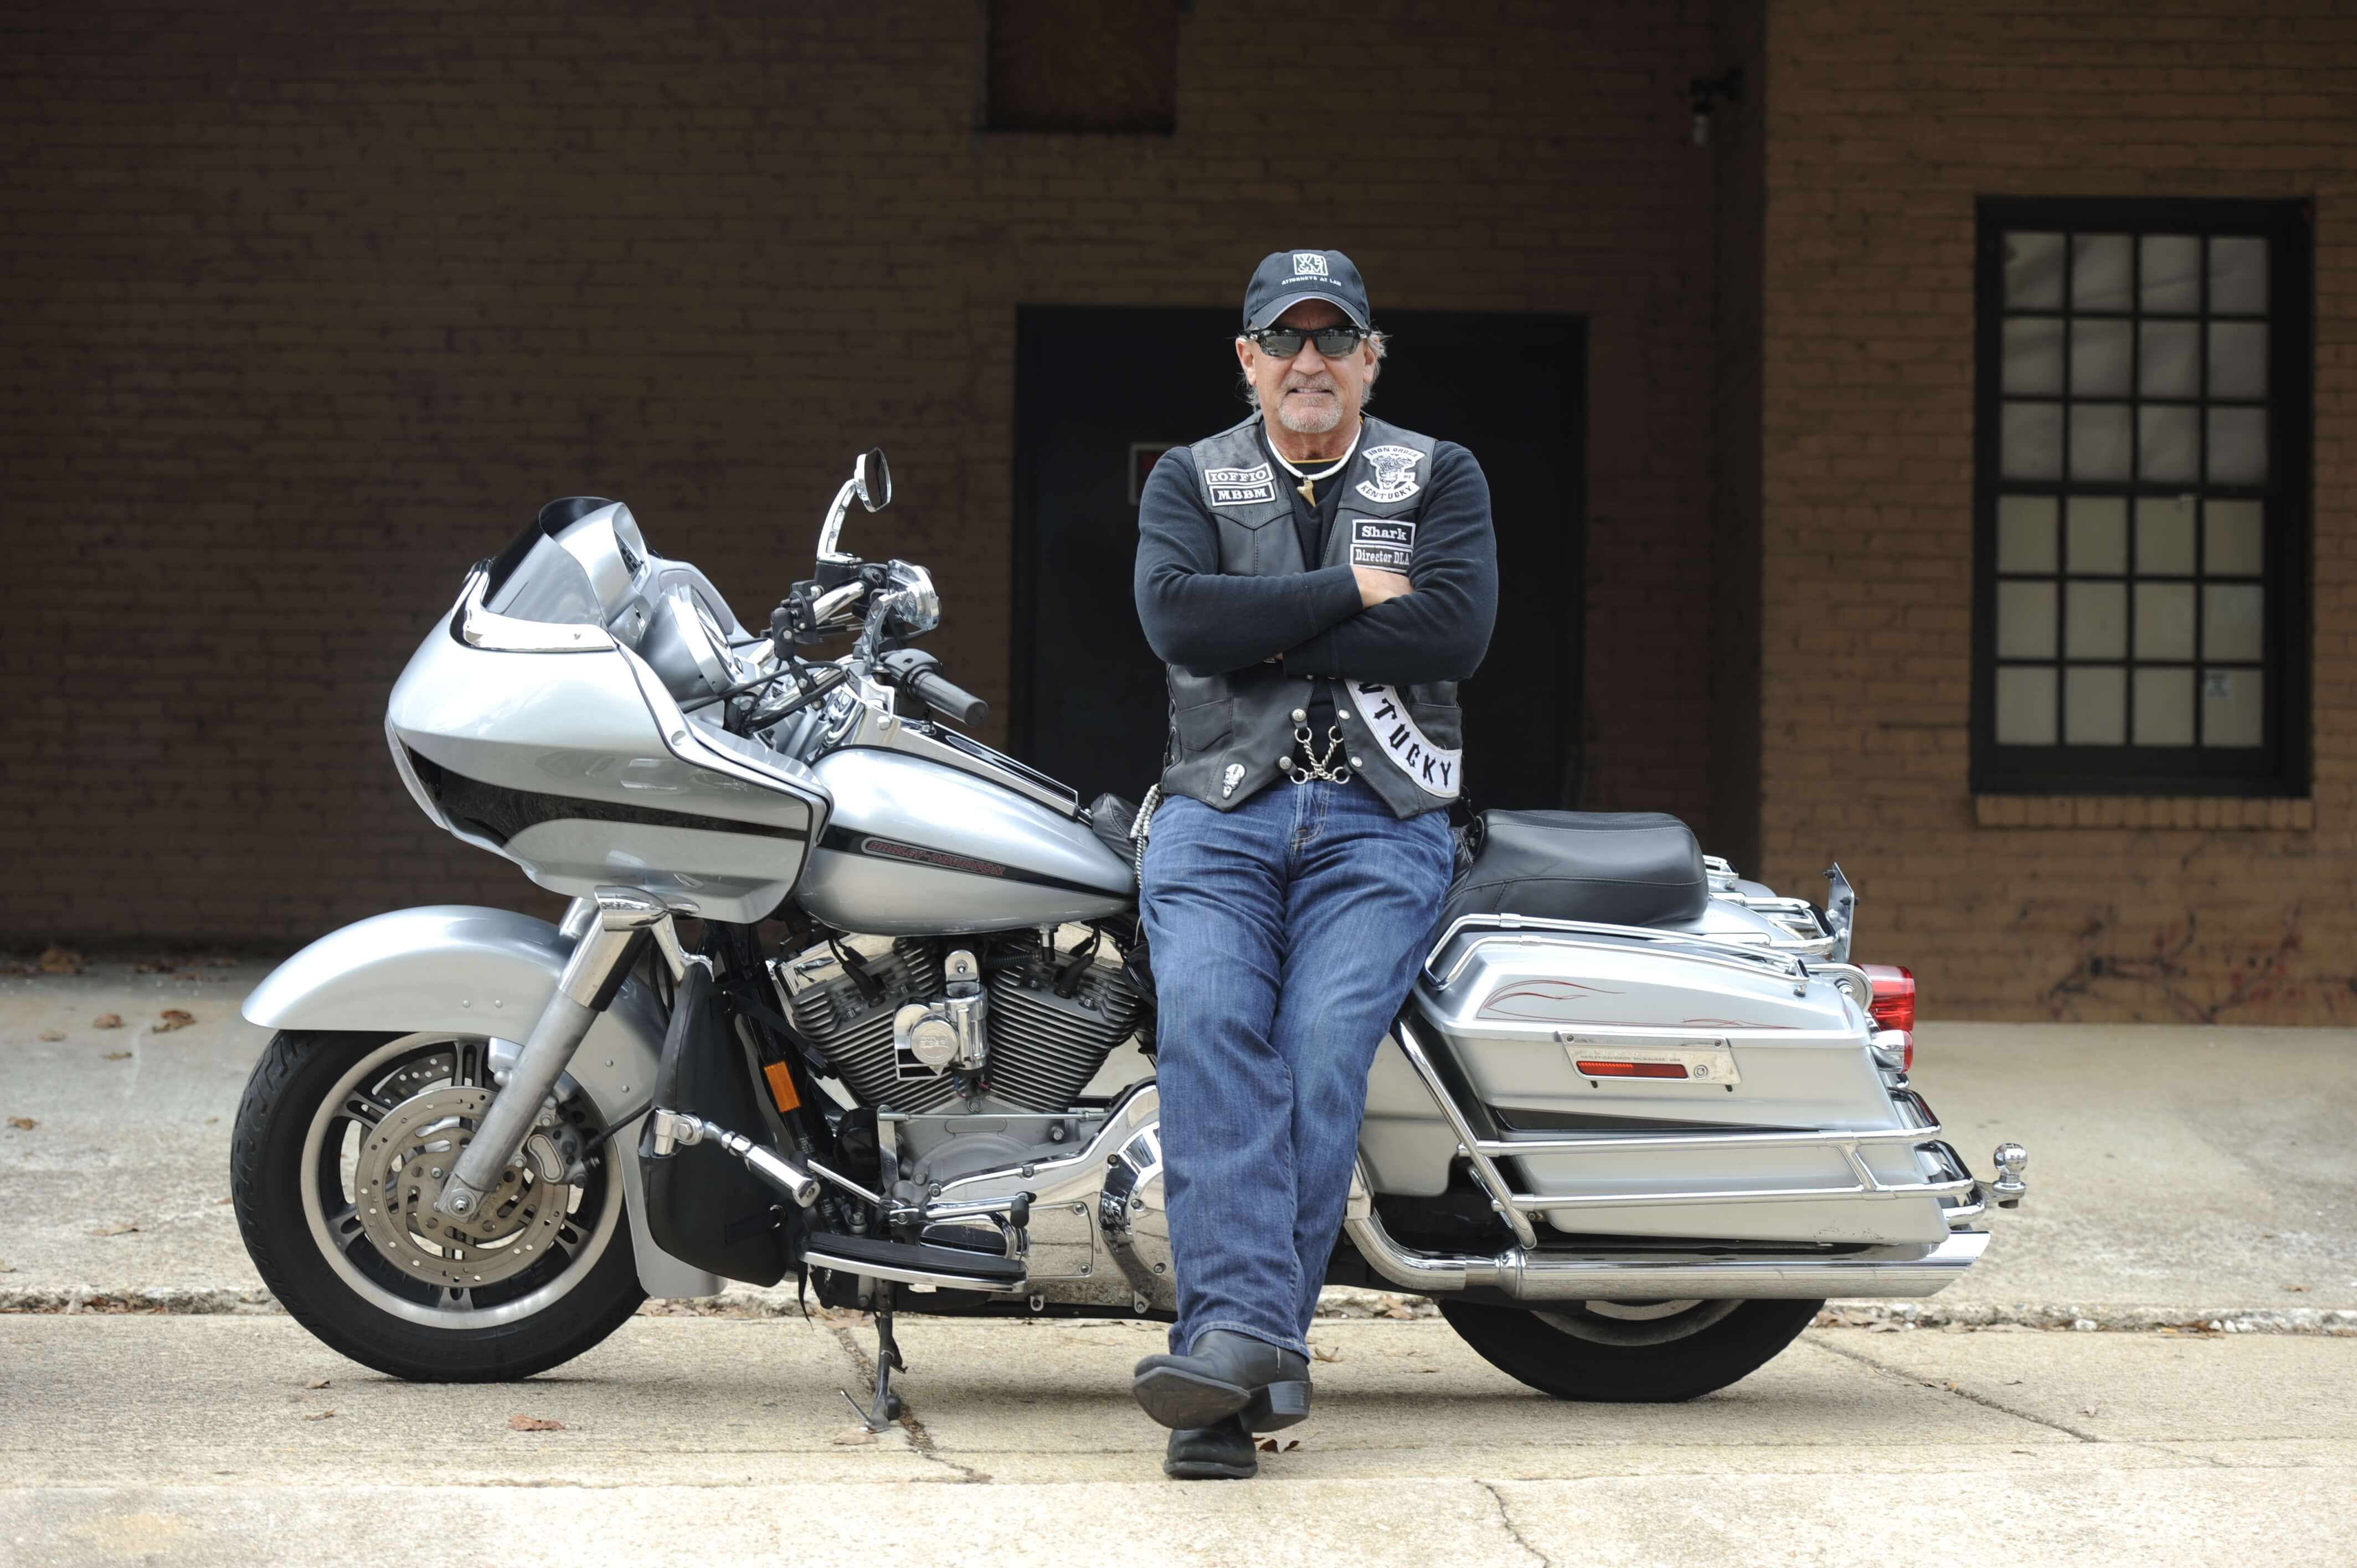 A Motorcycle Club member with his cruiser bike